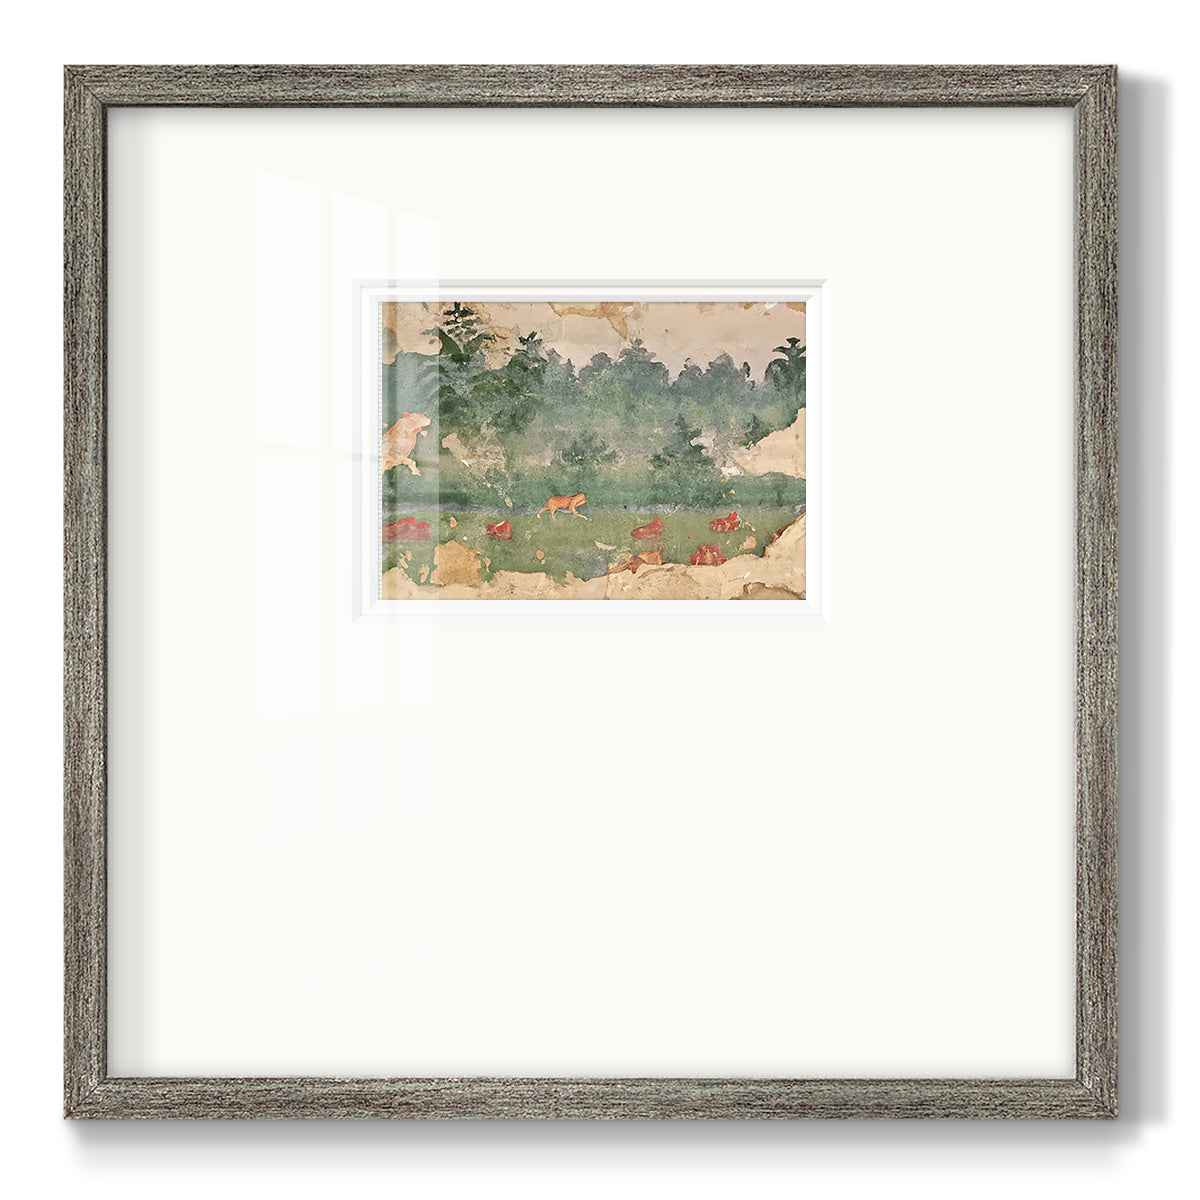 Wooded Tapestry Premium Framed Print Double Matboard